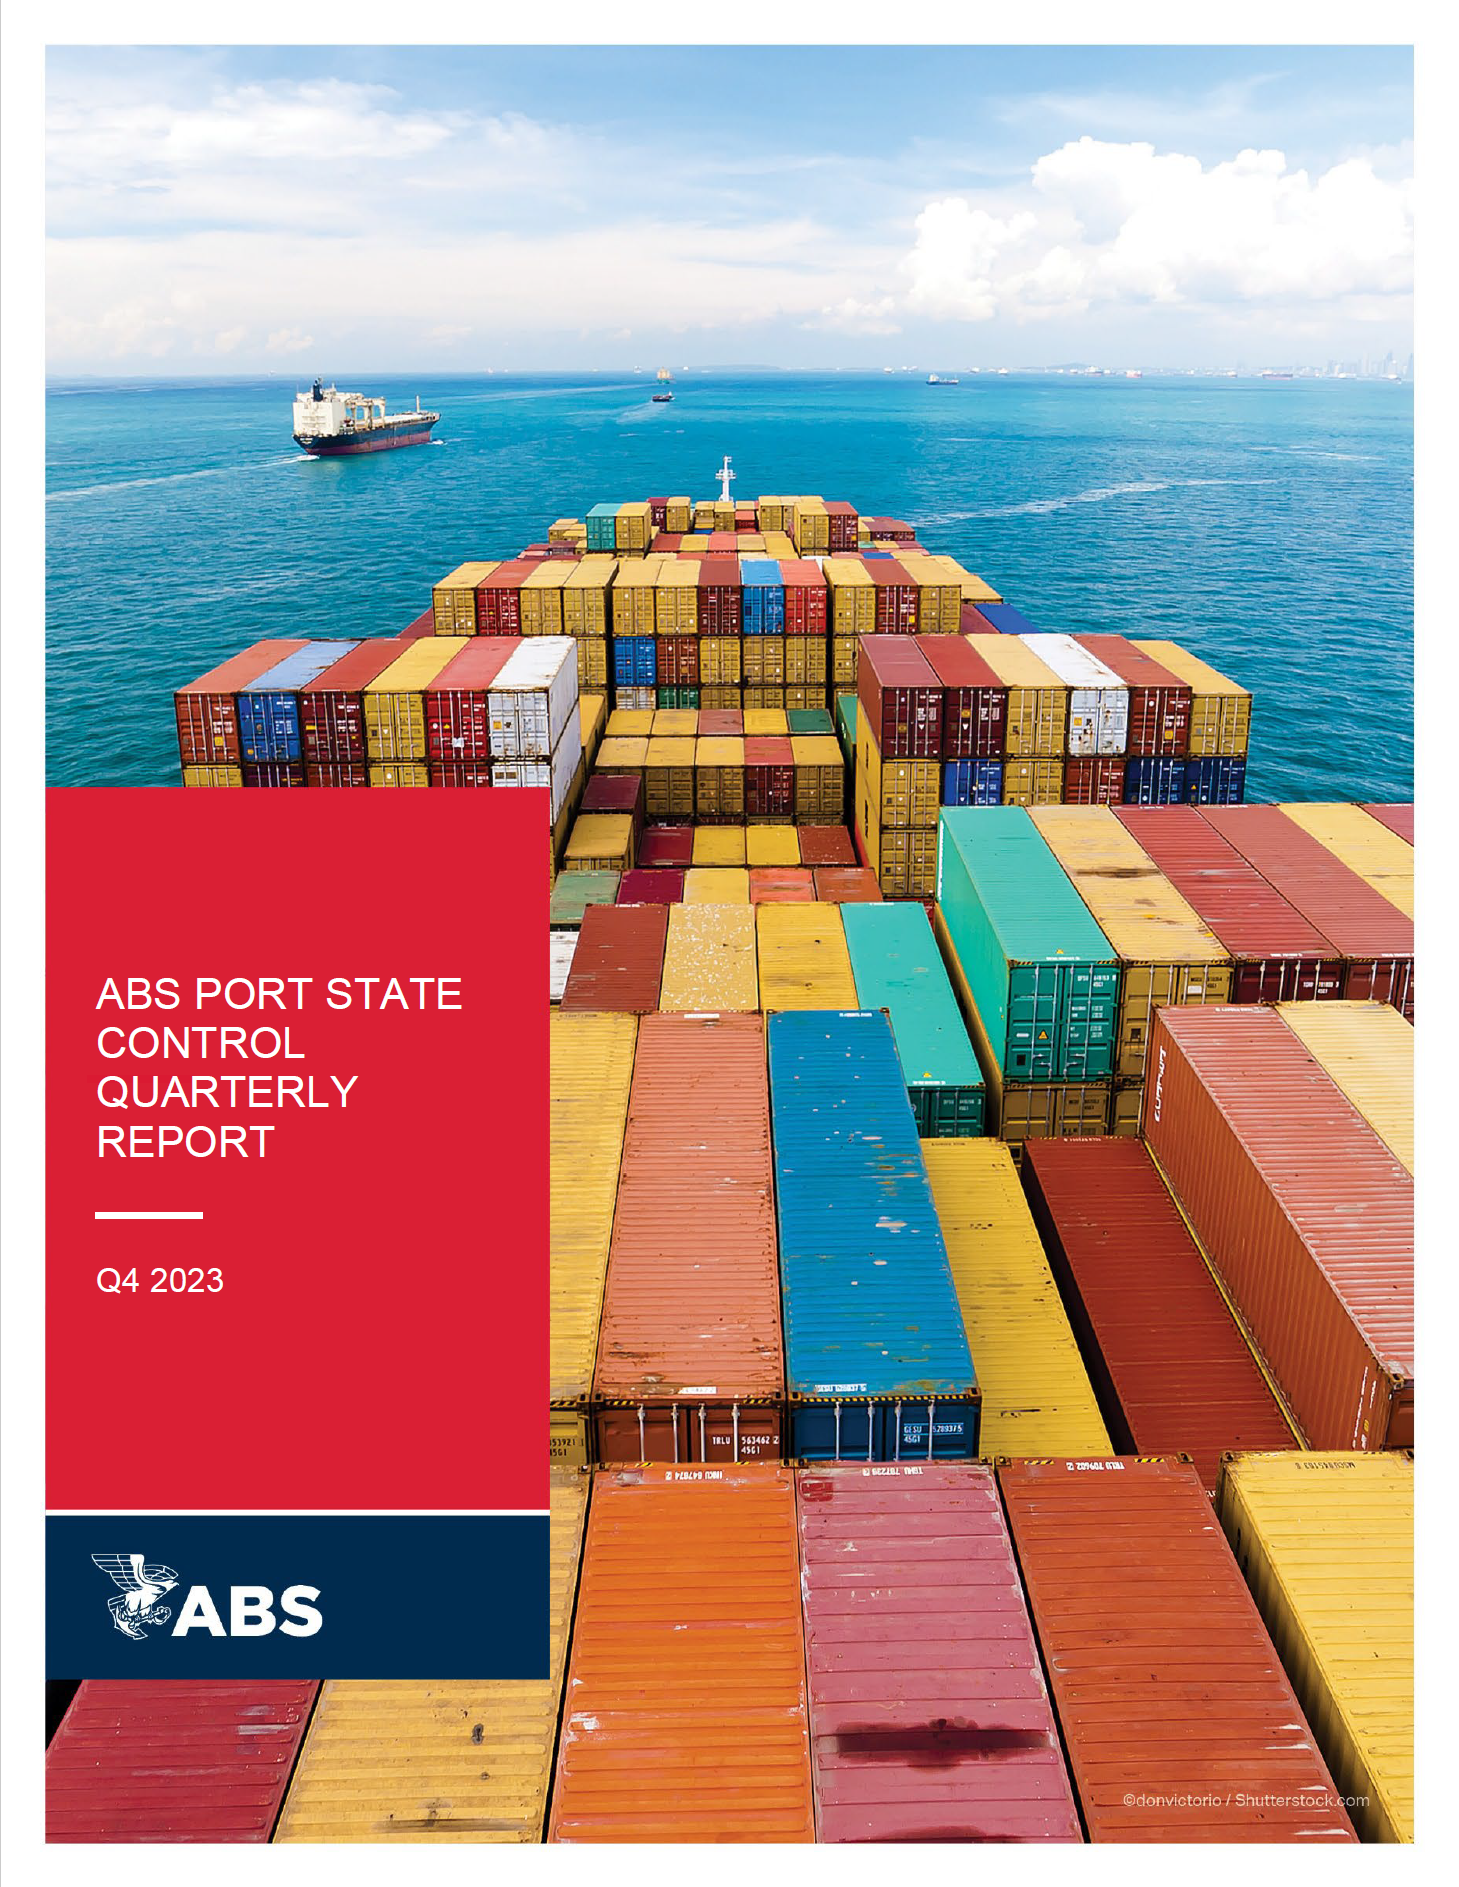 ABS Port State Control Quarterly Report Q4 2022